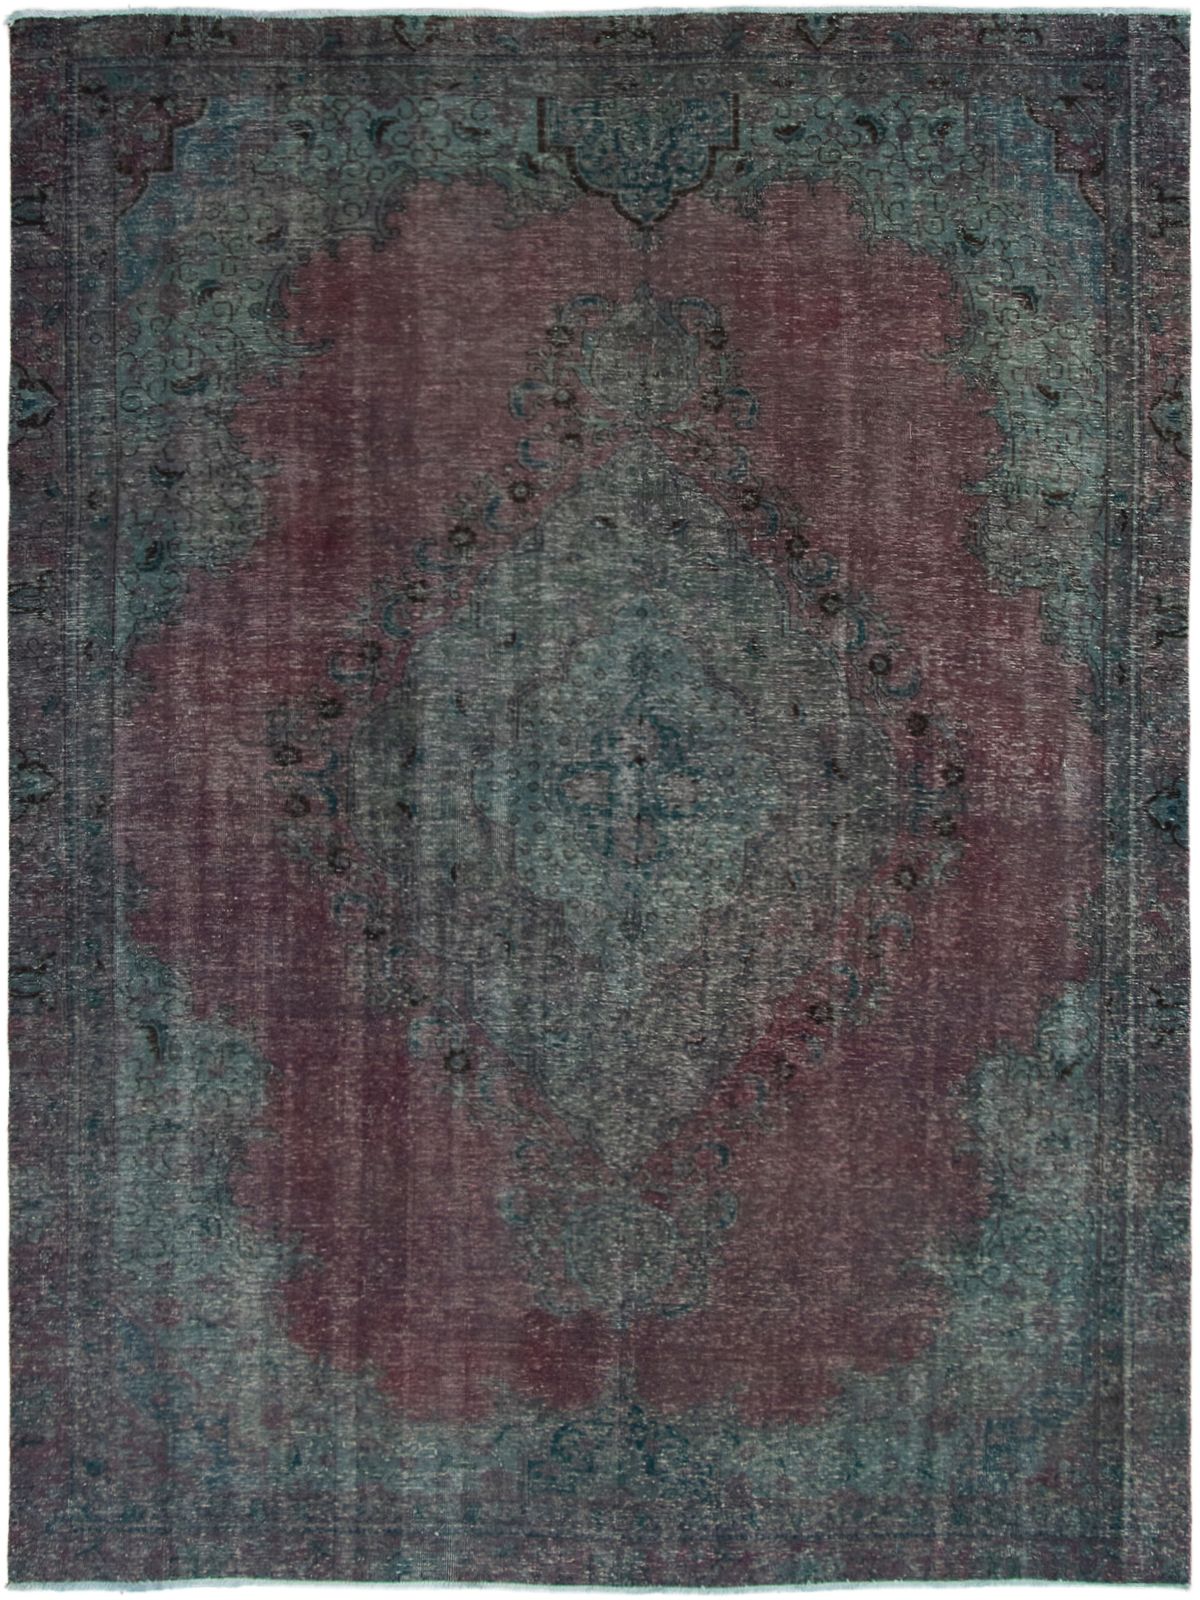 Hand-knotted Color Transition Dark Burgundy, Dark Green Wool Rug 8'6" x 11'5" Size: 8'6" x 11'5"  